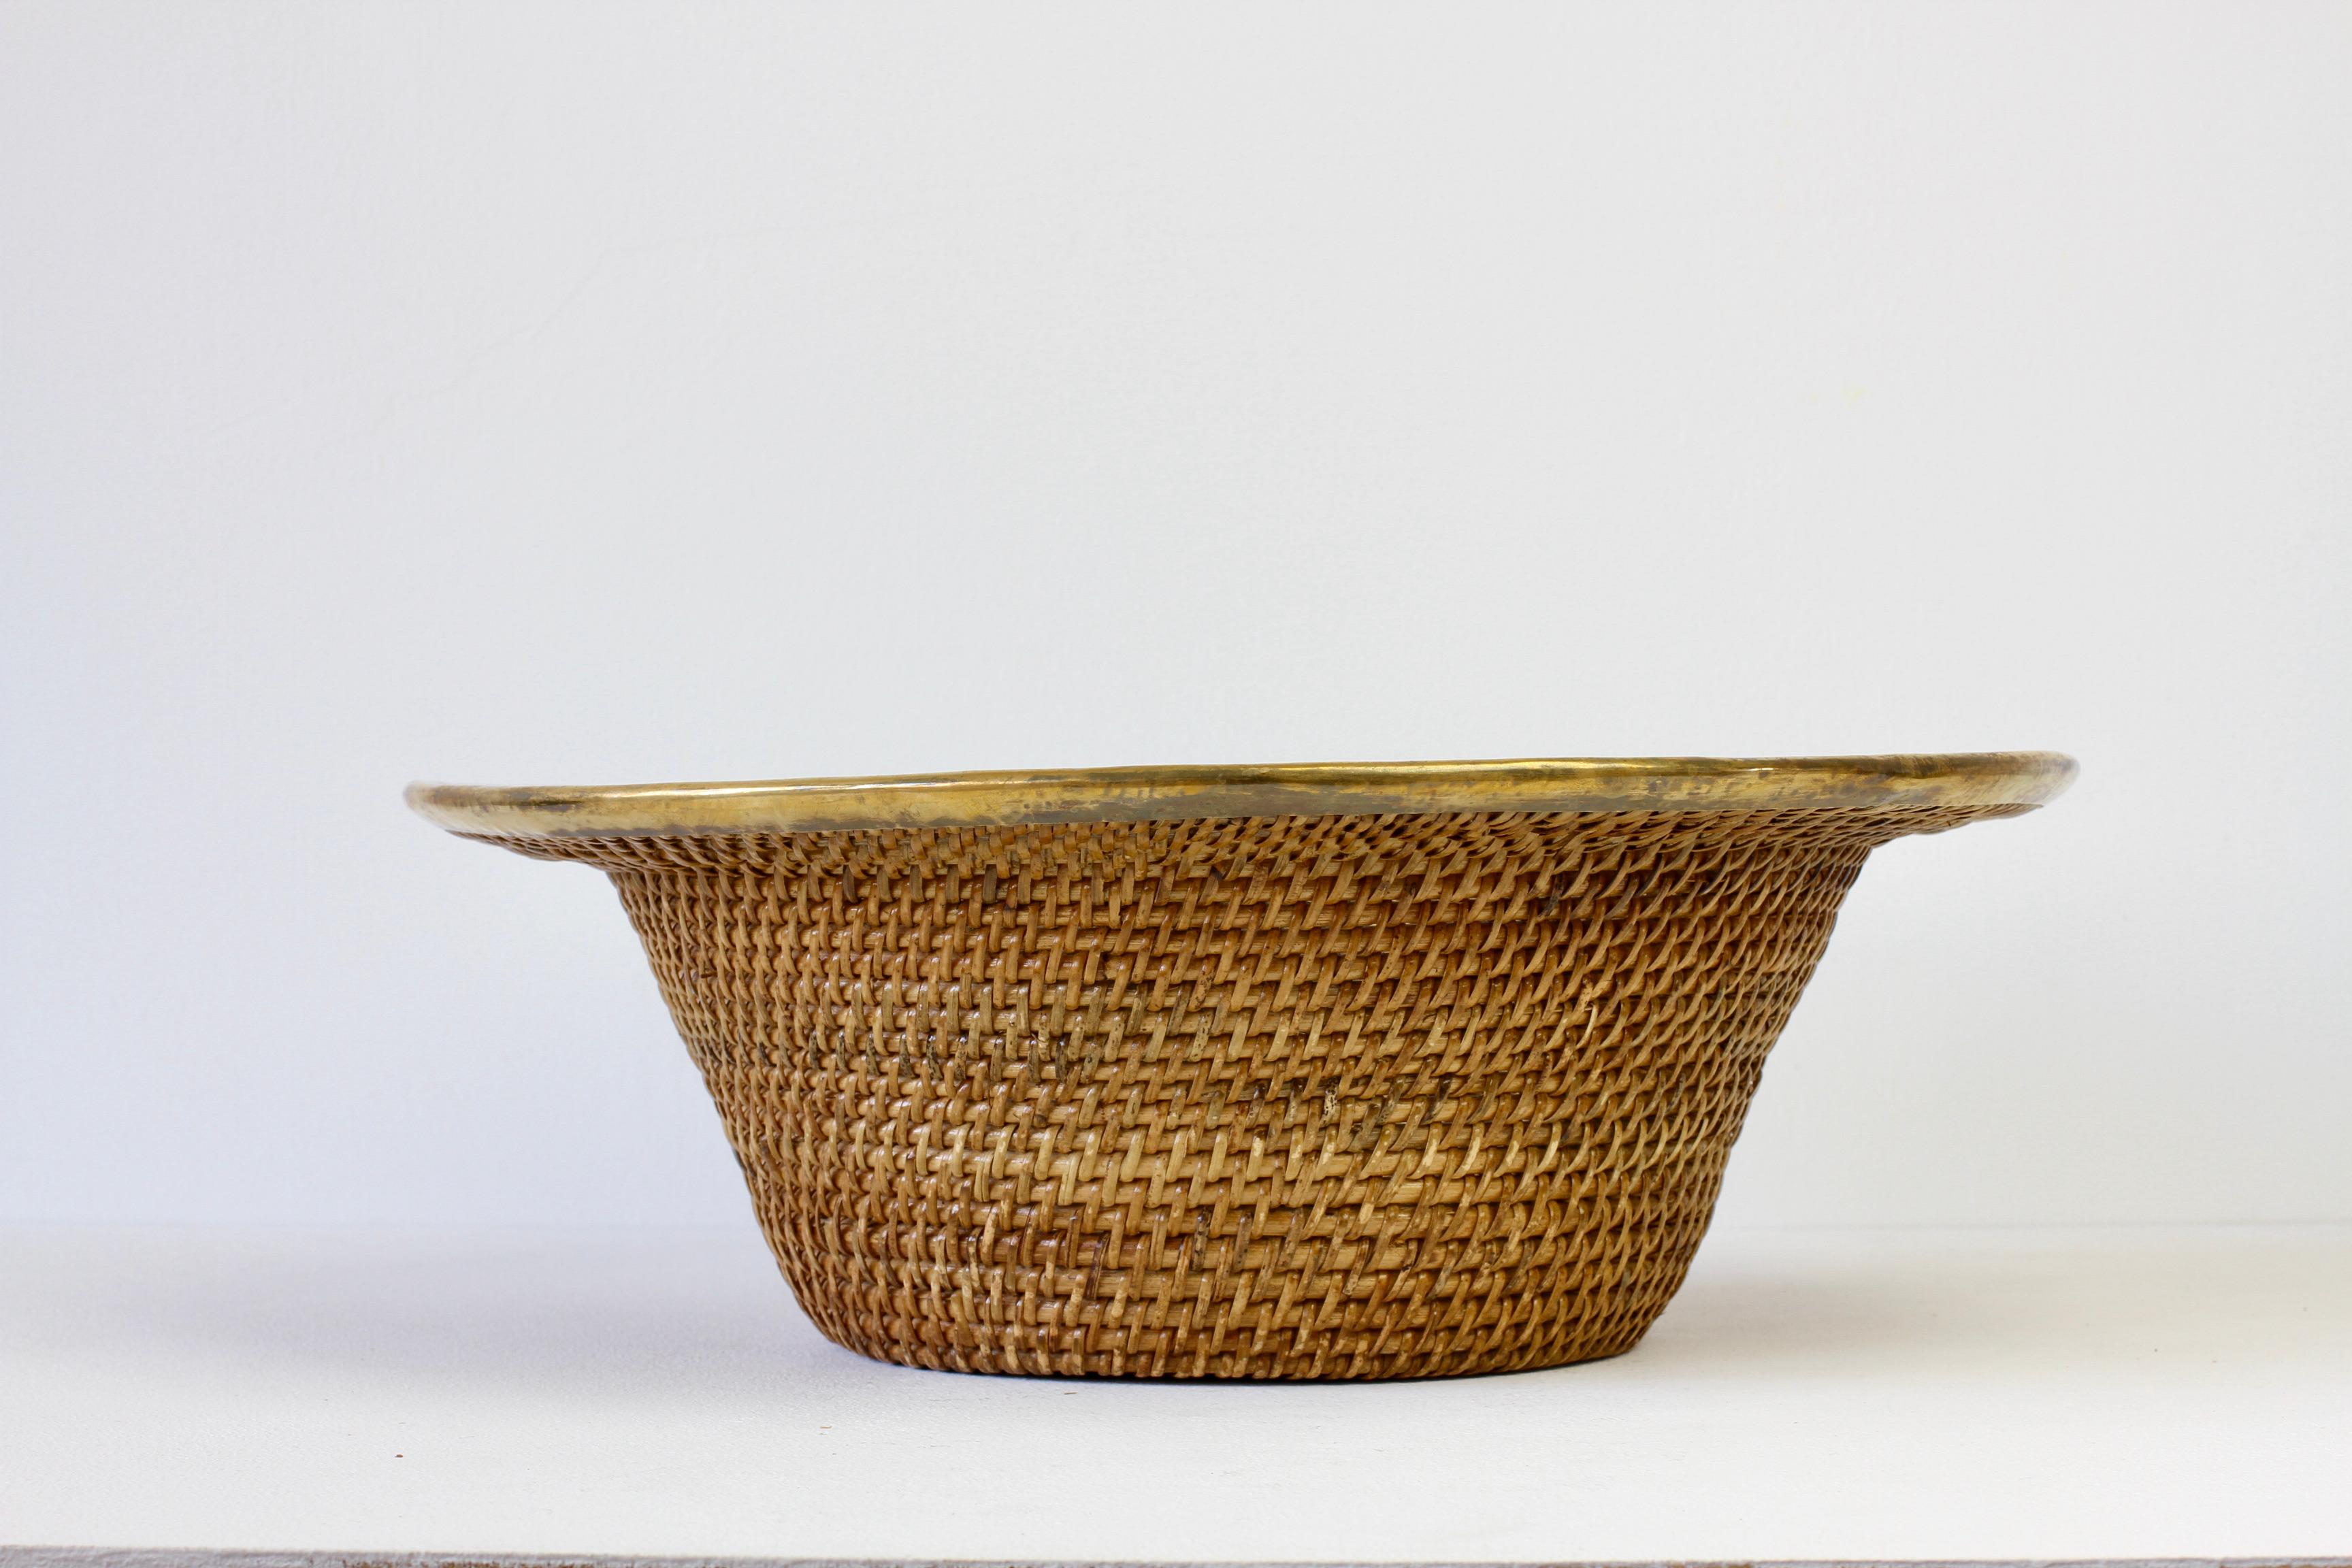 Large mid-century Hollywood Regency round bowl or dish made in Italy, circa 1970s. Made of weaved / woven rattan / wicker with a polished brass rim detail which finishes the piece perfectly. A must have for any Hollywood Regency enthusiast and lover